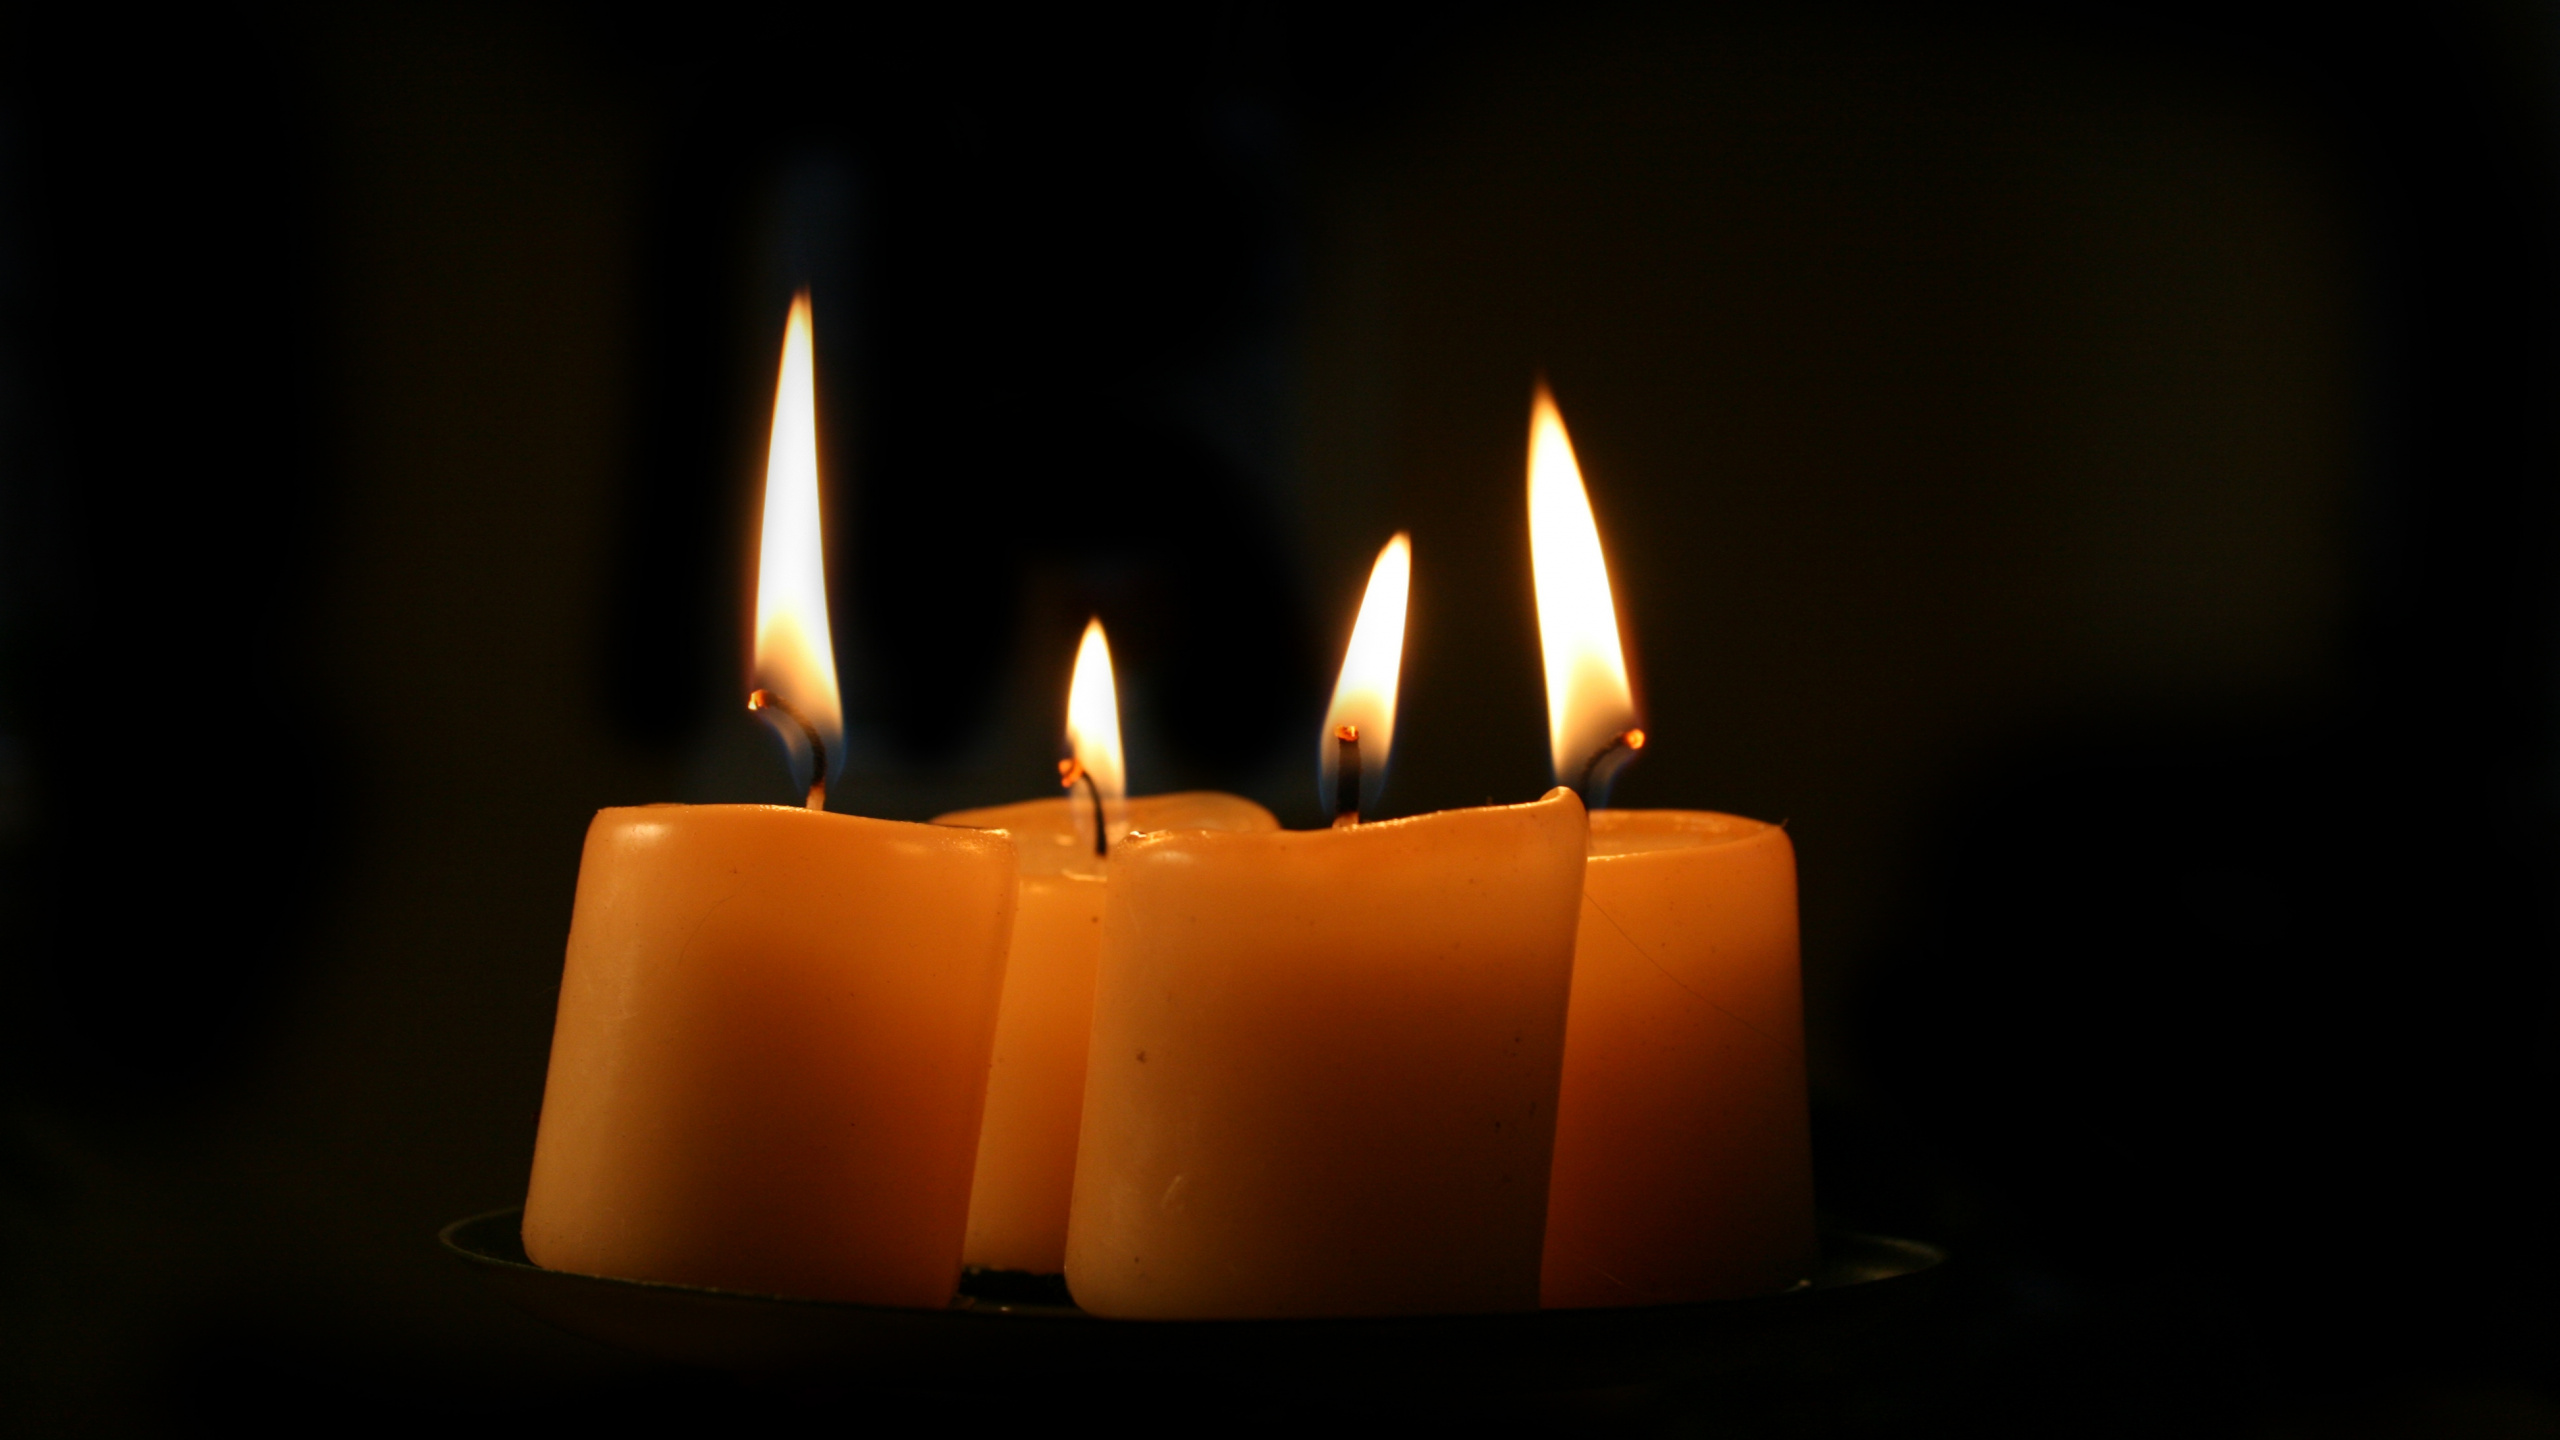 3 Lighted Candles on Black Background. Wallpaper in 2560x1440 Resolution